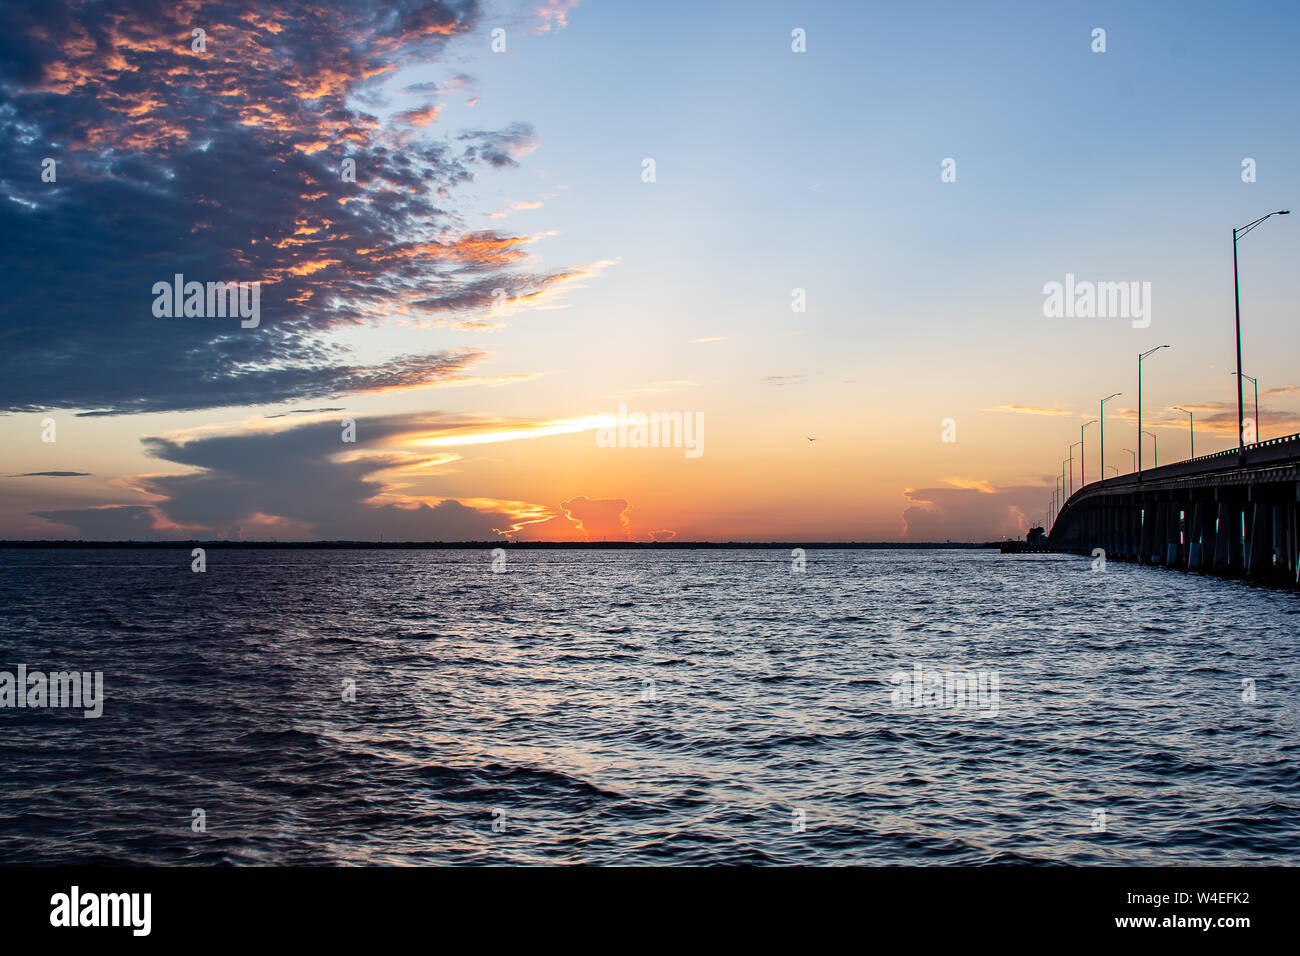 View at dawn on the Tampa bay in Florida - bridge on the right Stock Photo